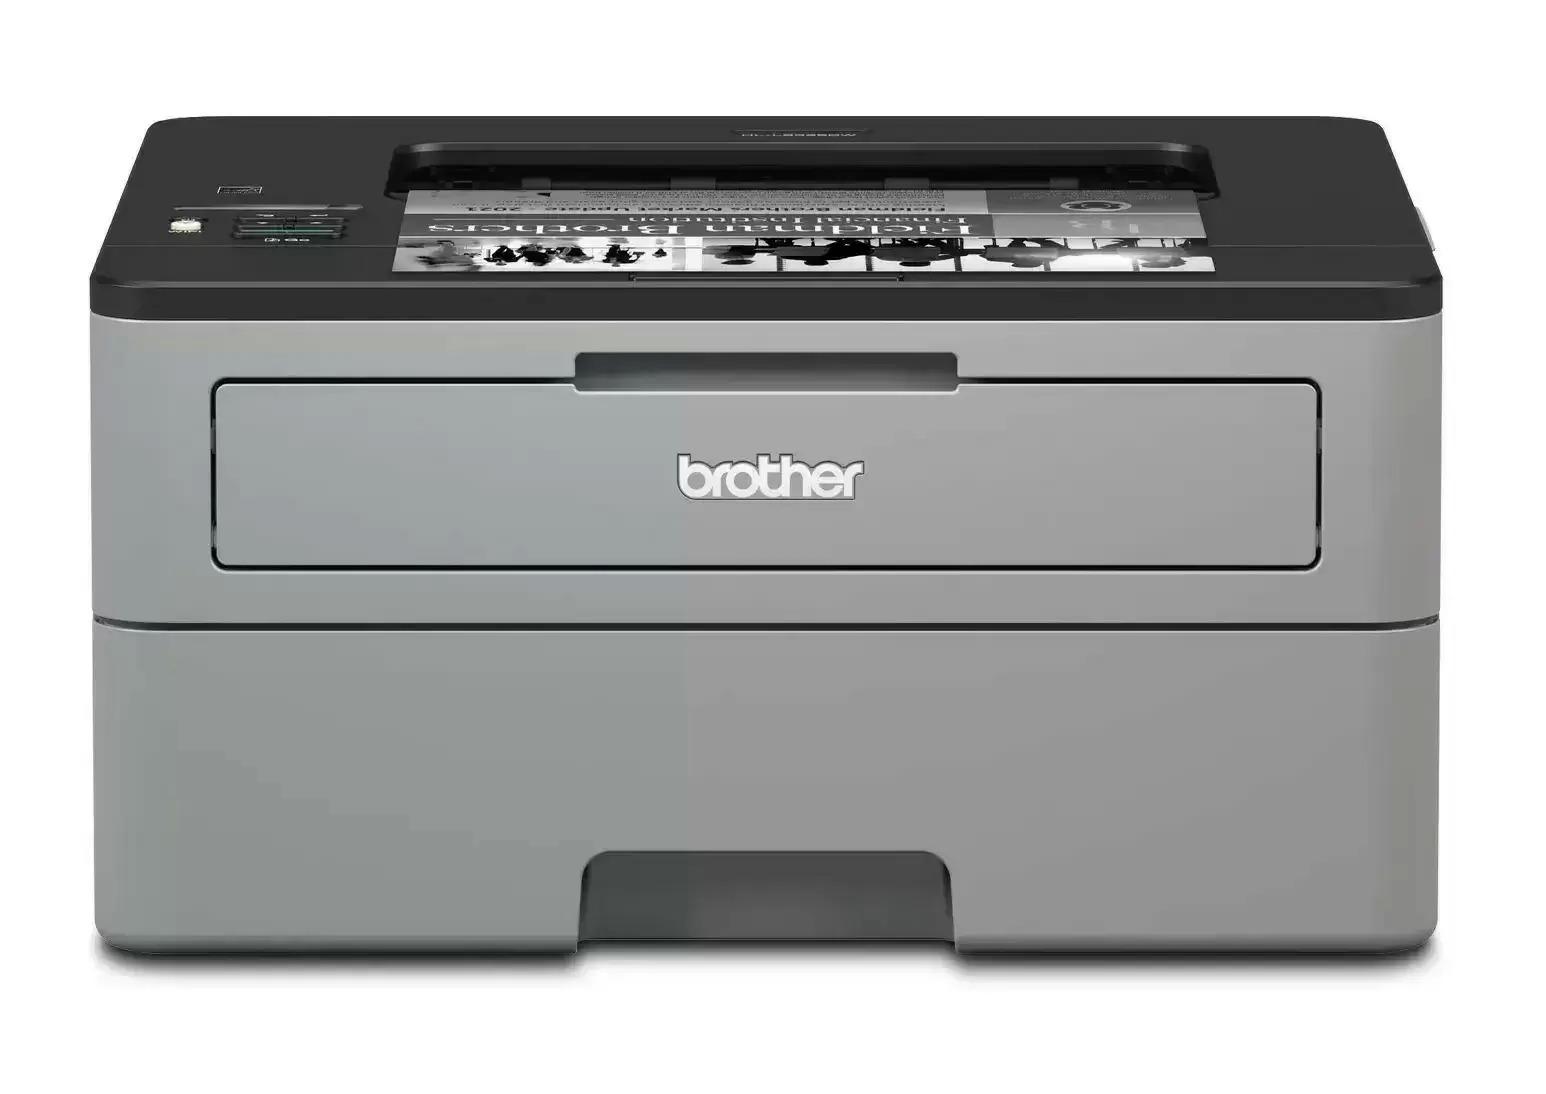 Brother HL-L2325DW Monochrome Wireless Duplex Laser Printer for $69.99 Shipped